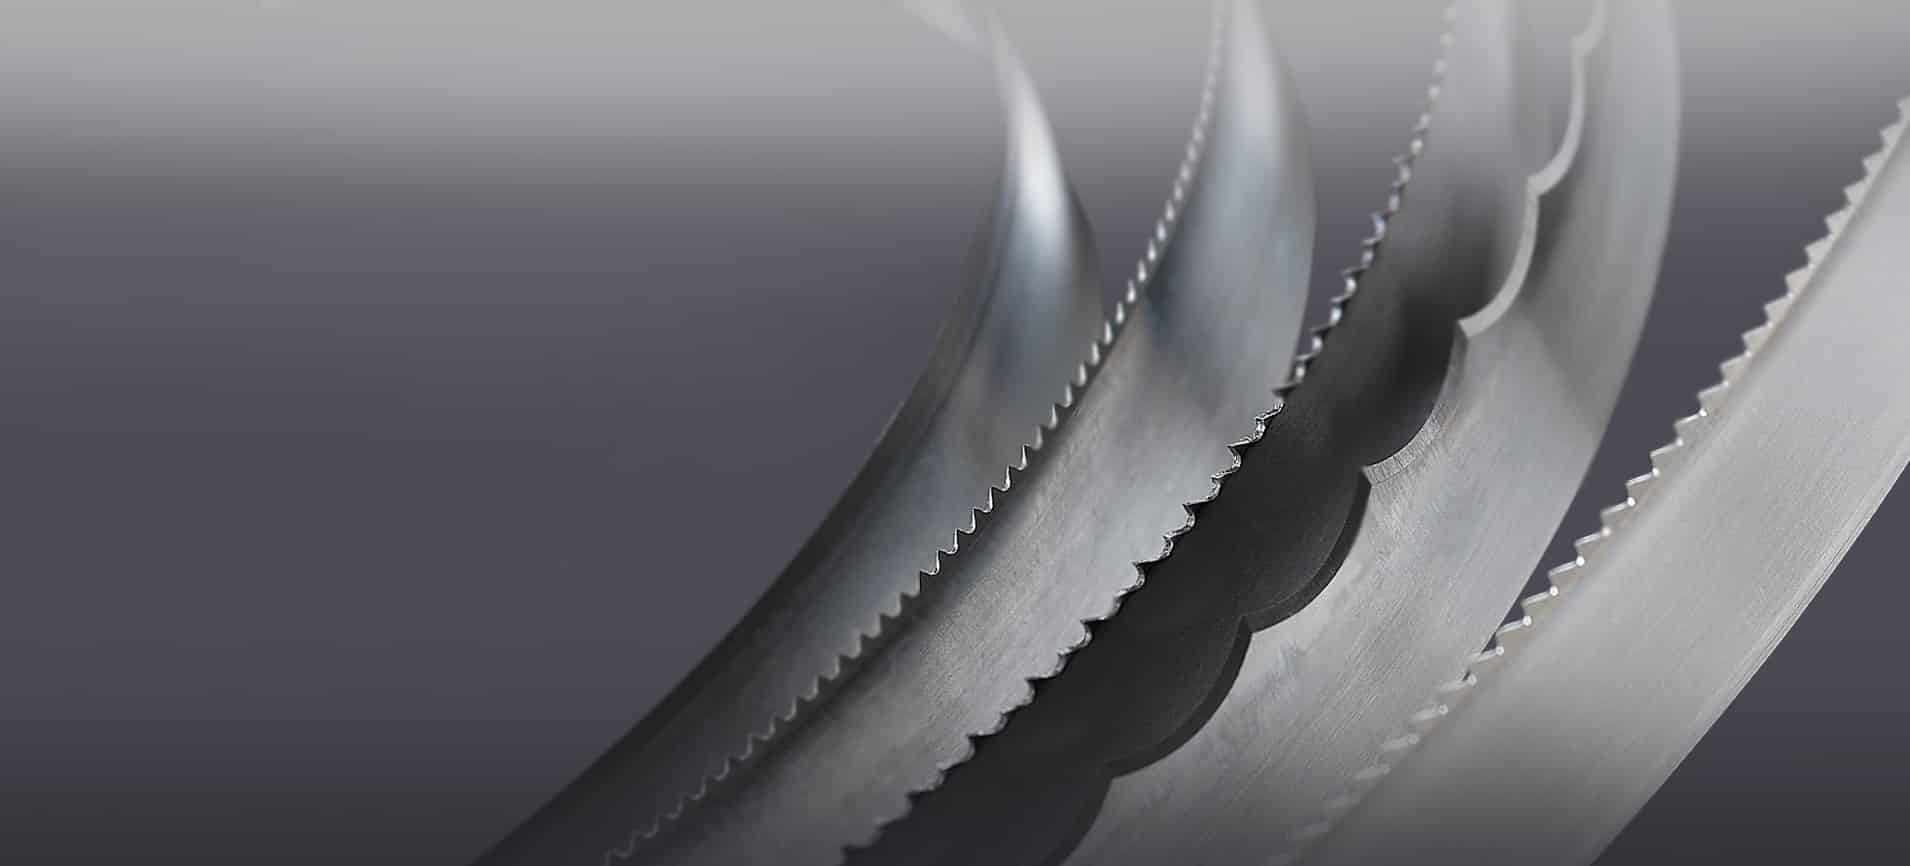 Simmons' foam cutting blades curve and catch the light against a dark gray background.